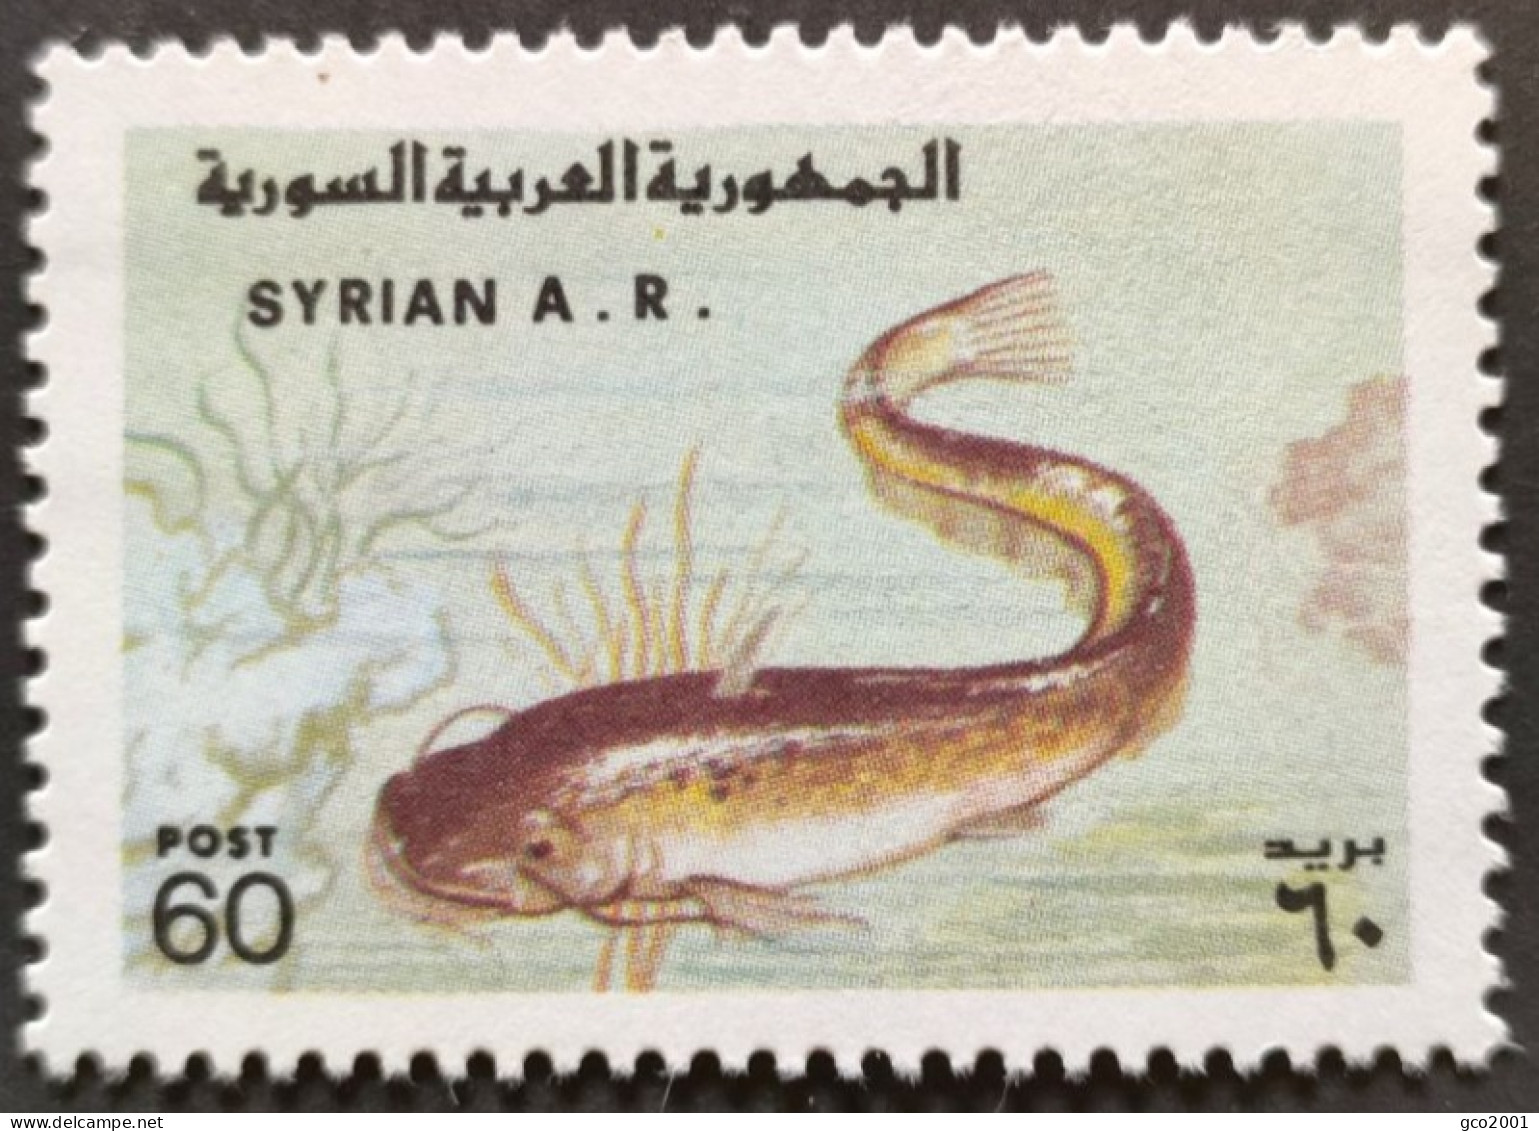 SYRIE / YT 524 / FAUNE - POISSON CHAT / NEUF ** / MNH - Fishes